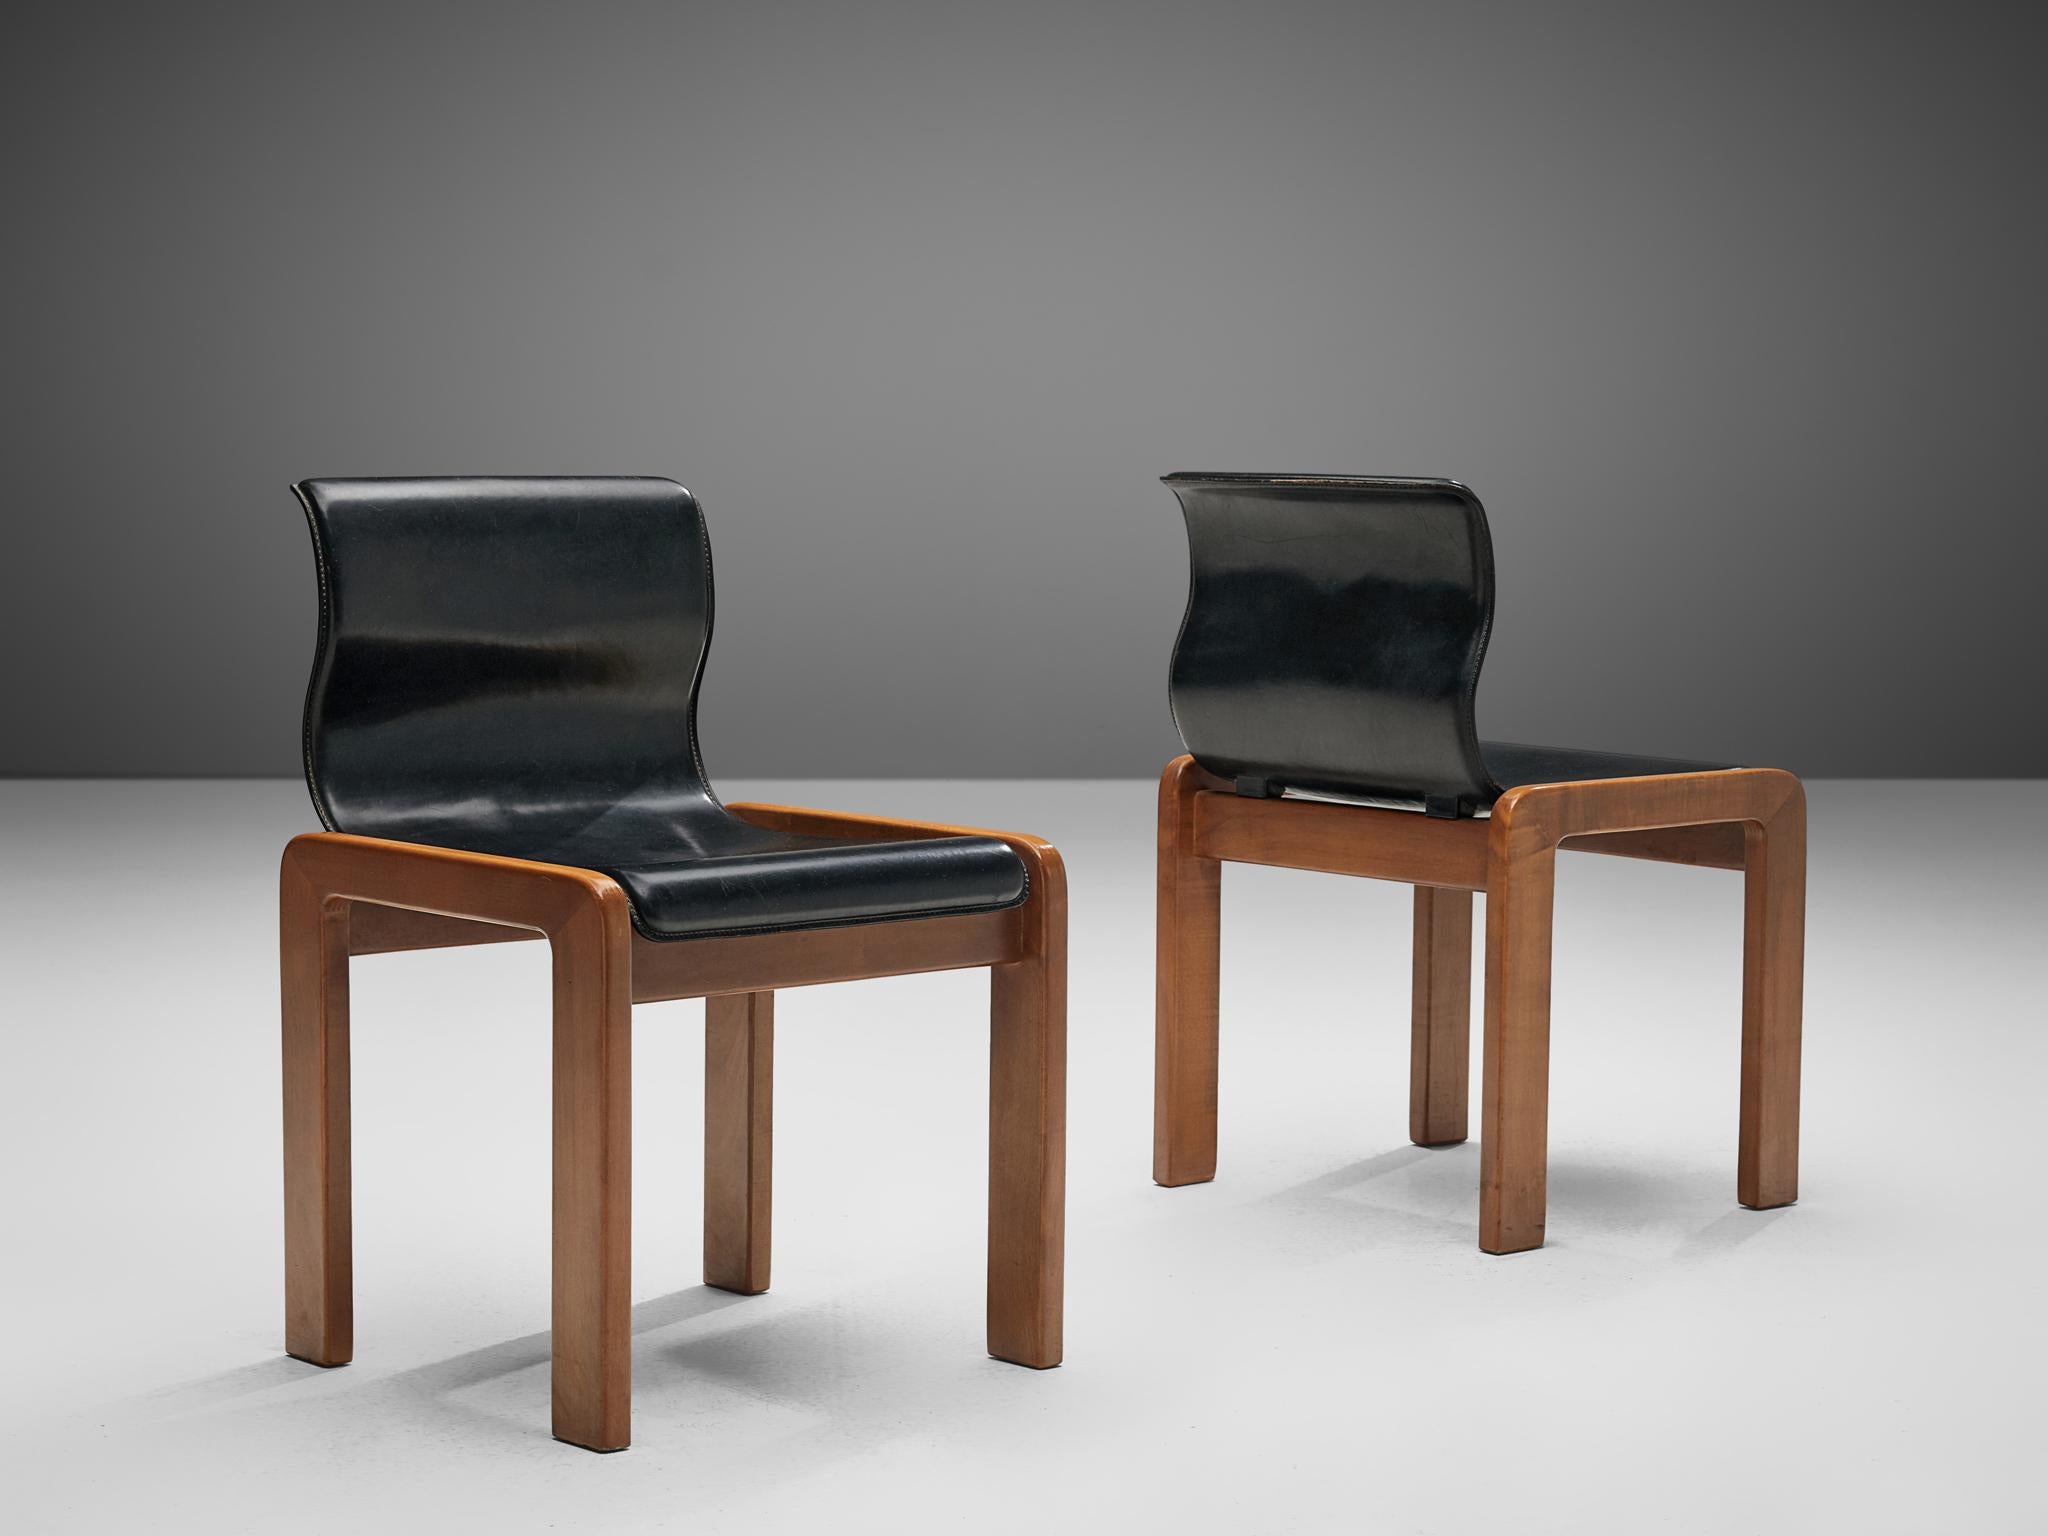 Late 20th Century Italian Chairs with Black Leather Seats, 1970s